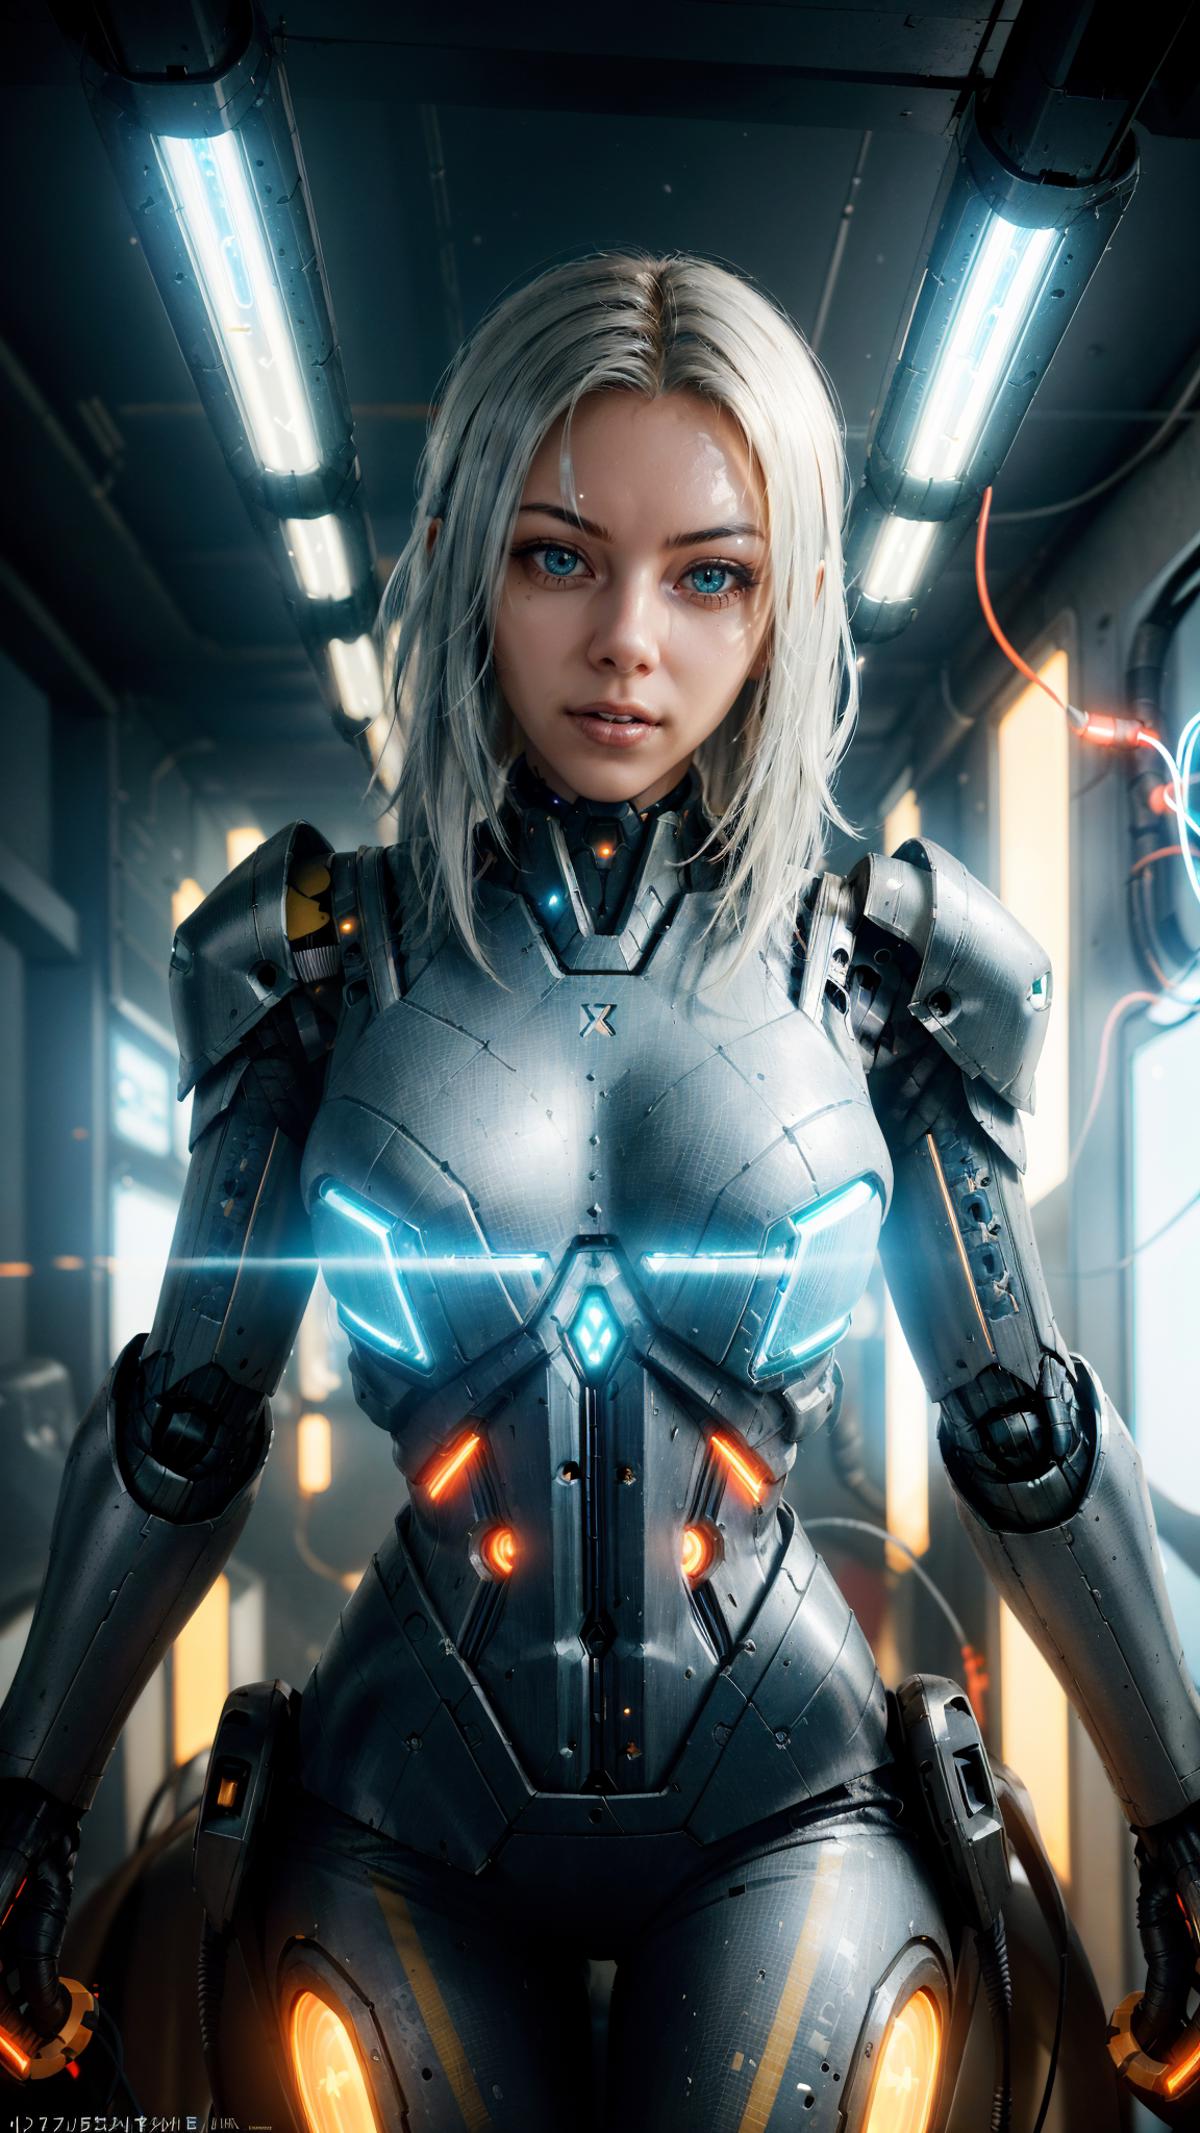 Futuristic Robot Woman with Blue Eyes and Blonde Hair.